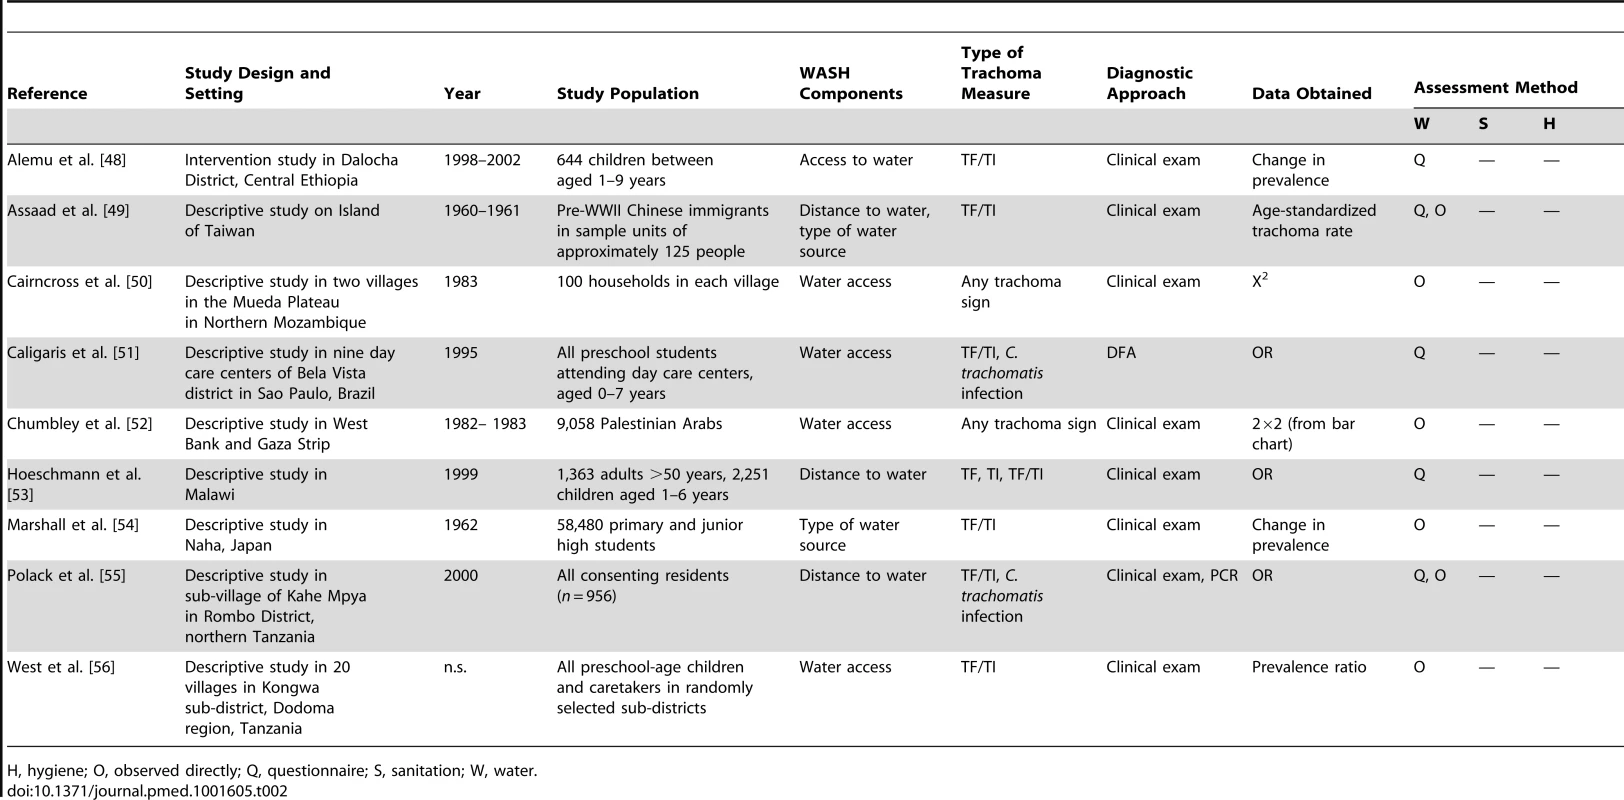 Summary of publications reporting only on water-related risk factors.